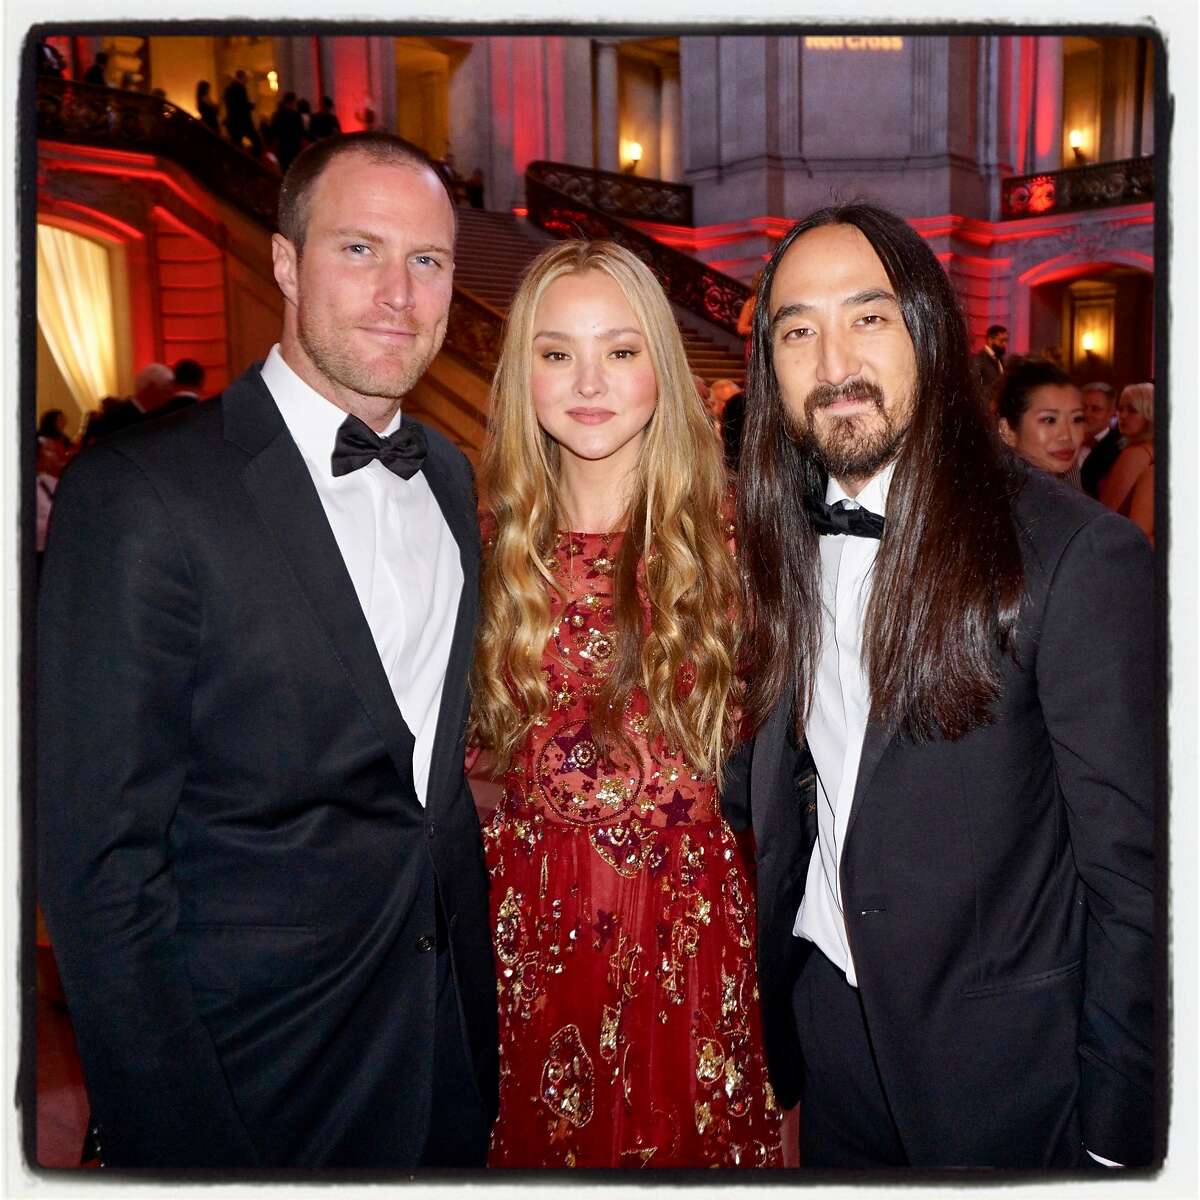 James Bailey and his wife, Devon Aoki (left) and DJ Steve Aoki at City Hall for the Red Cross Gala. March 17, 2018.